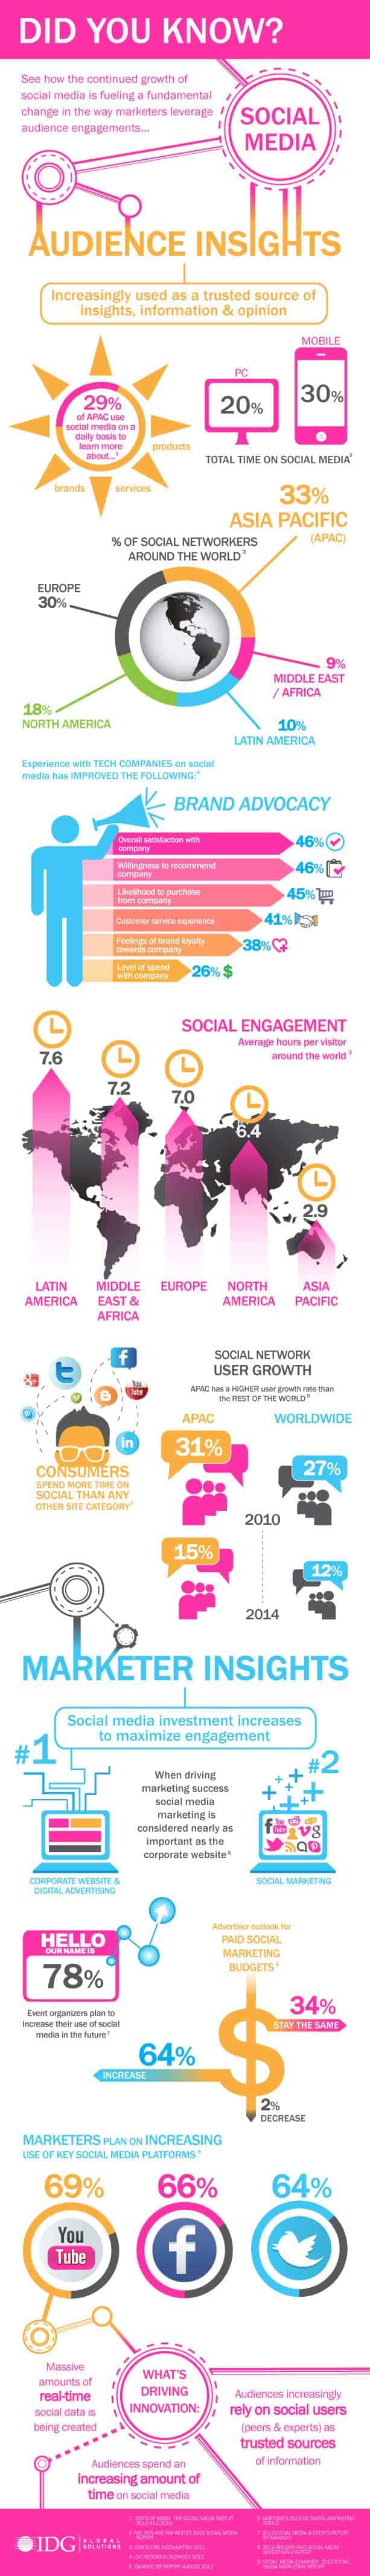 Marketer and Audience Insights on Social Media Worldwide